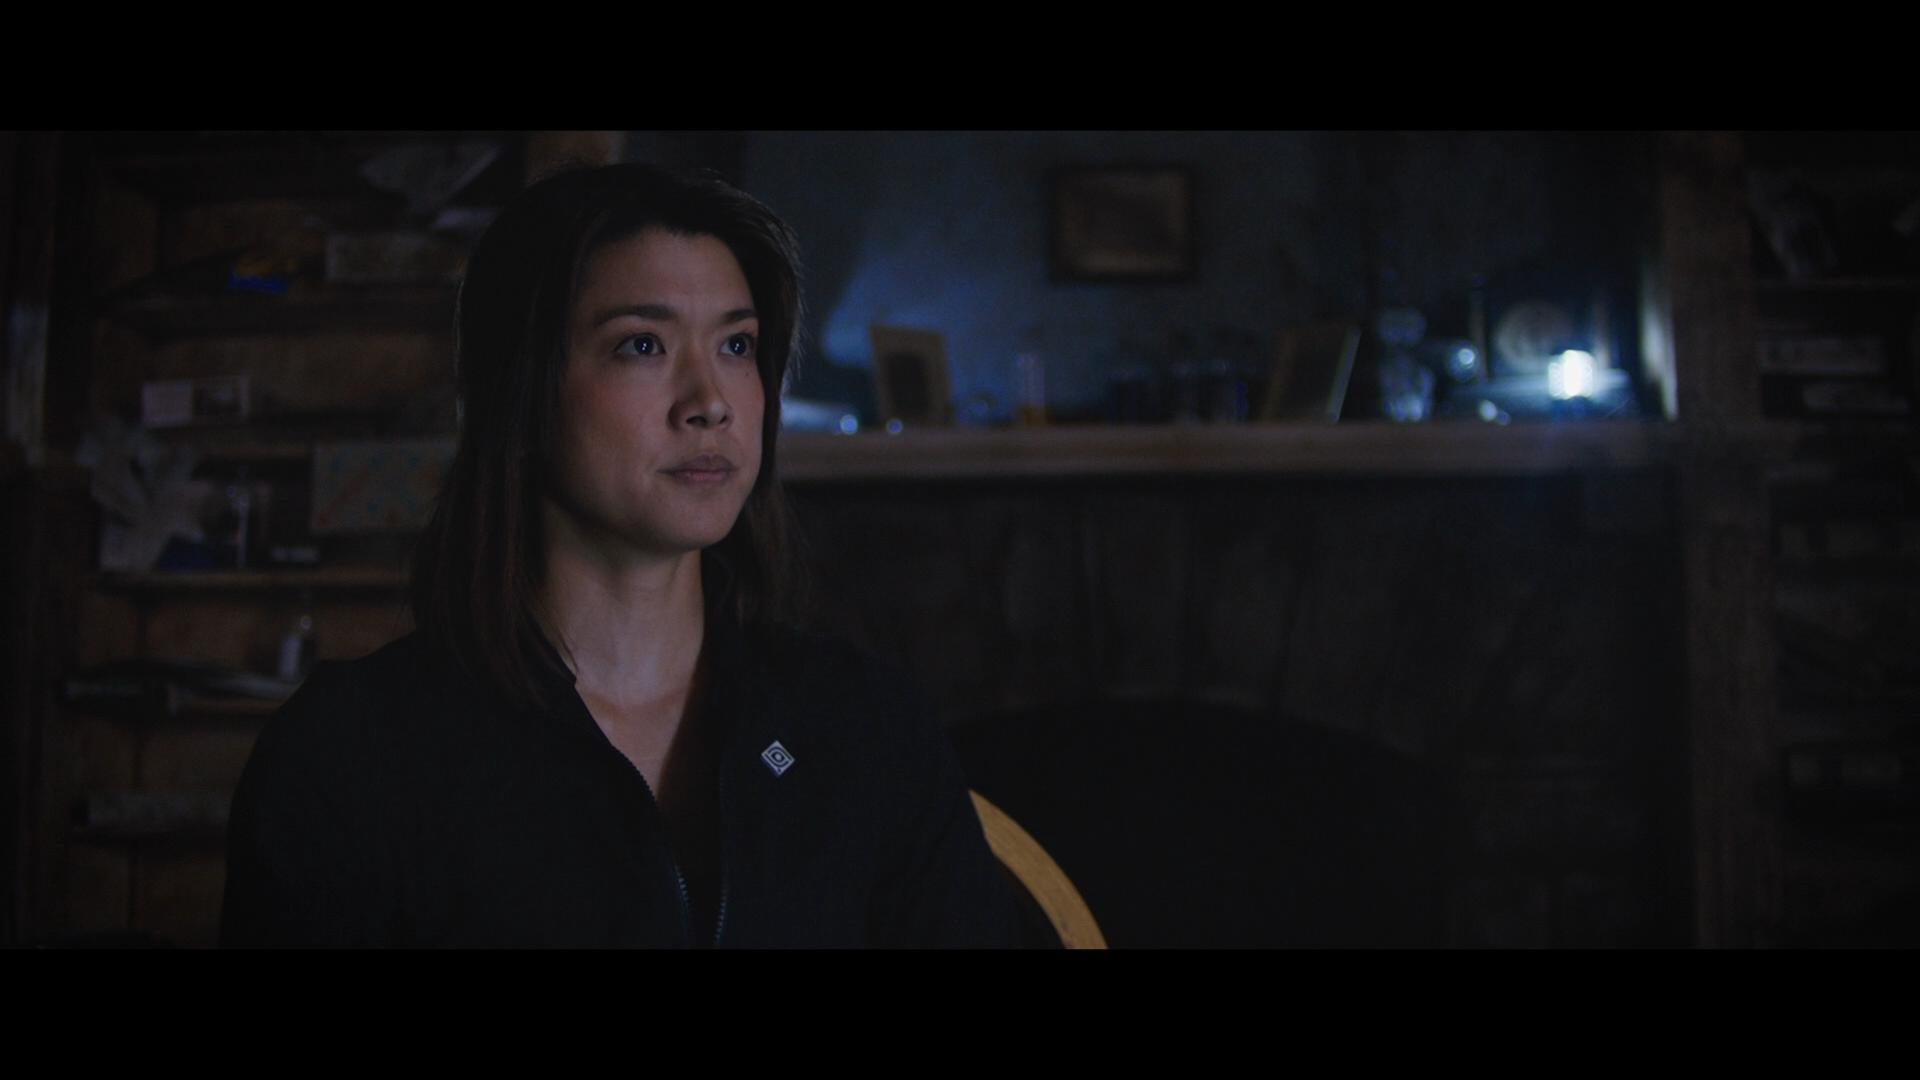 Image of Grace Park as a known actress in the film "Freaks"